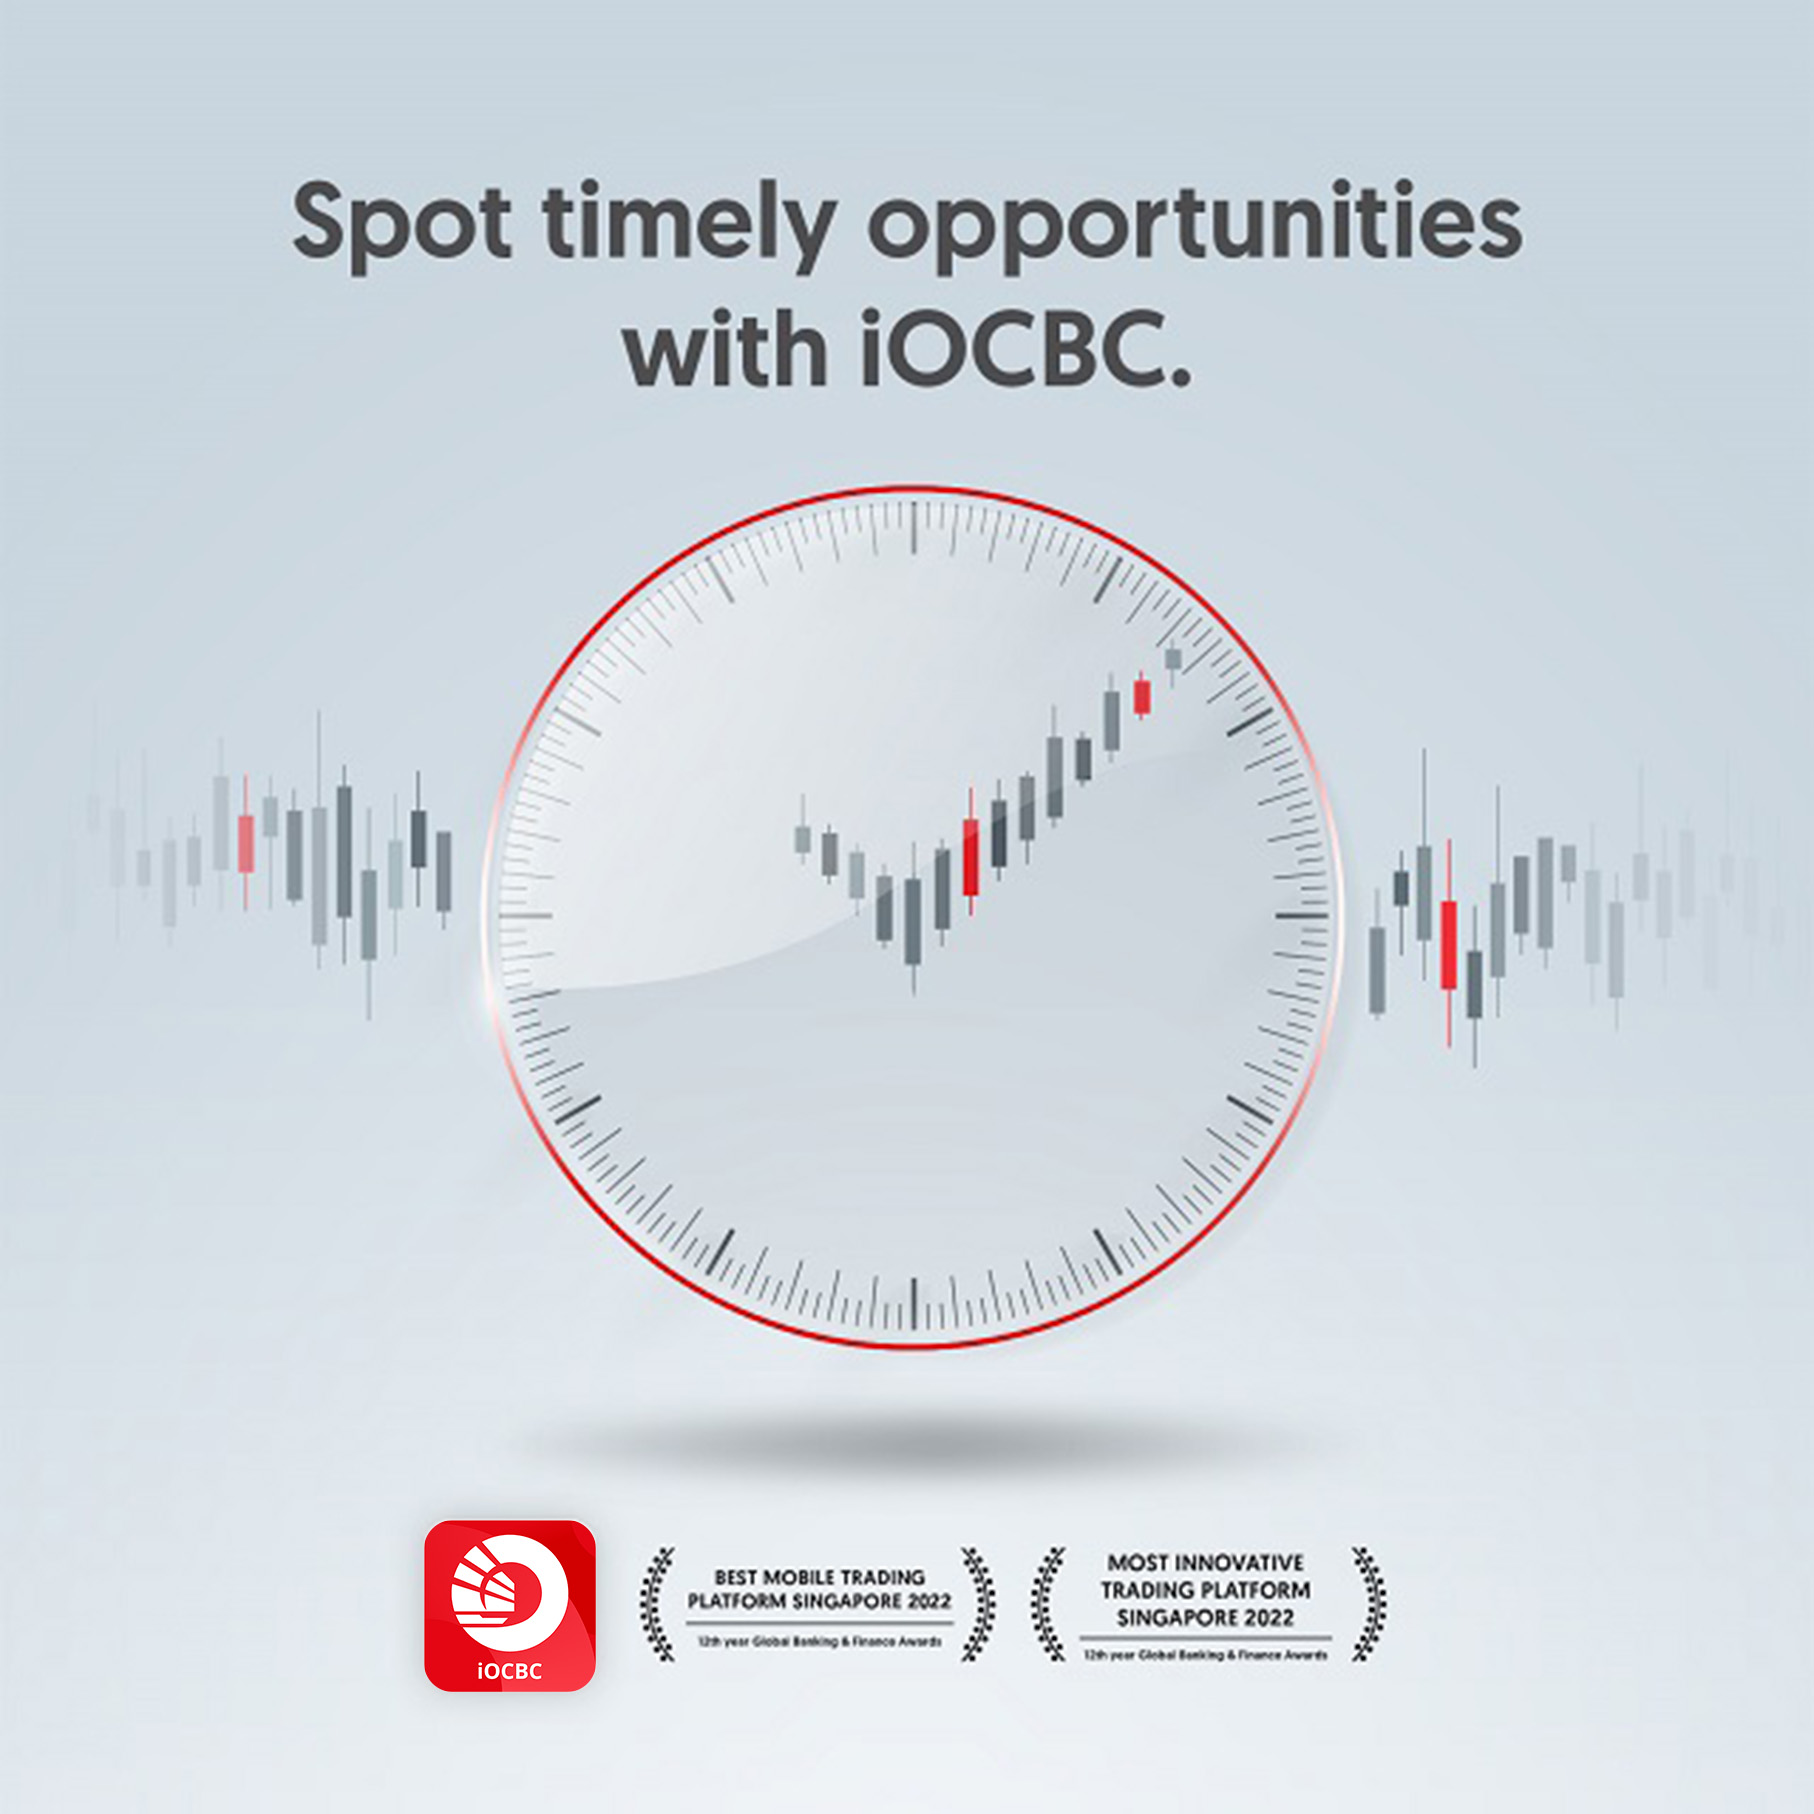 Spot timely opportunities with iOCBC trading platform